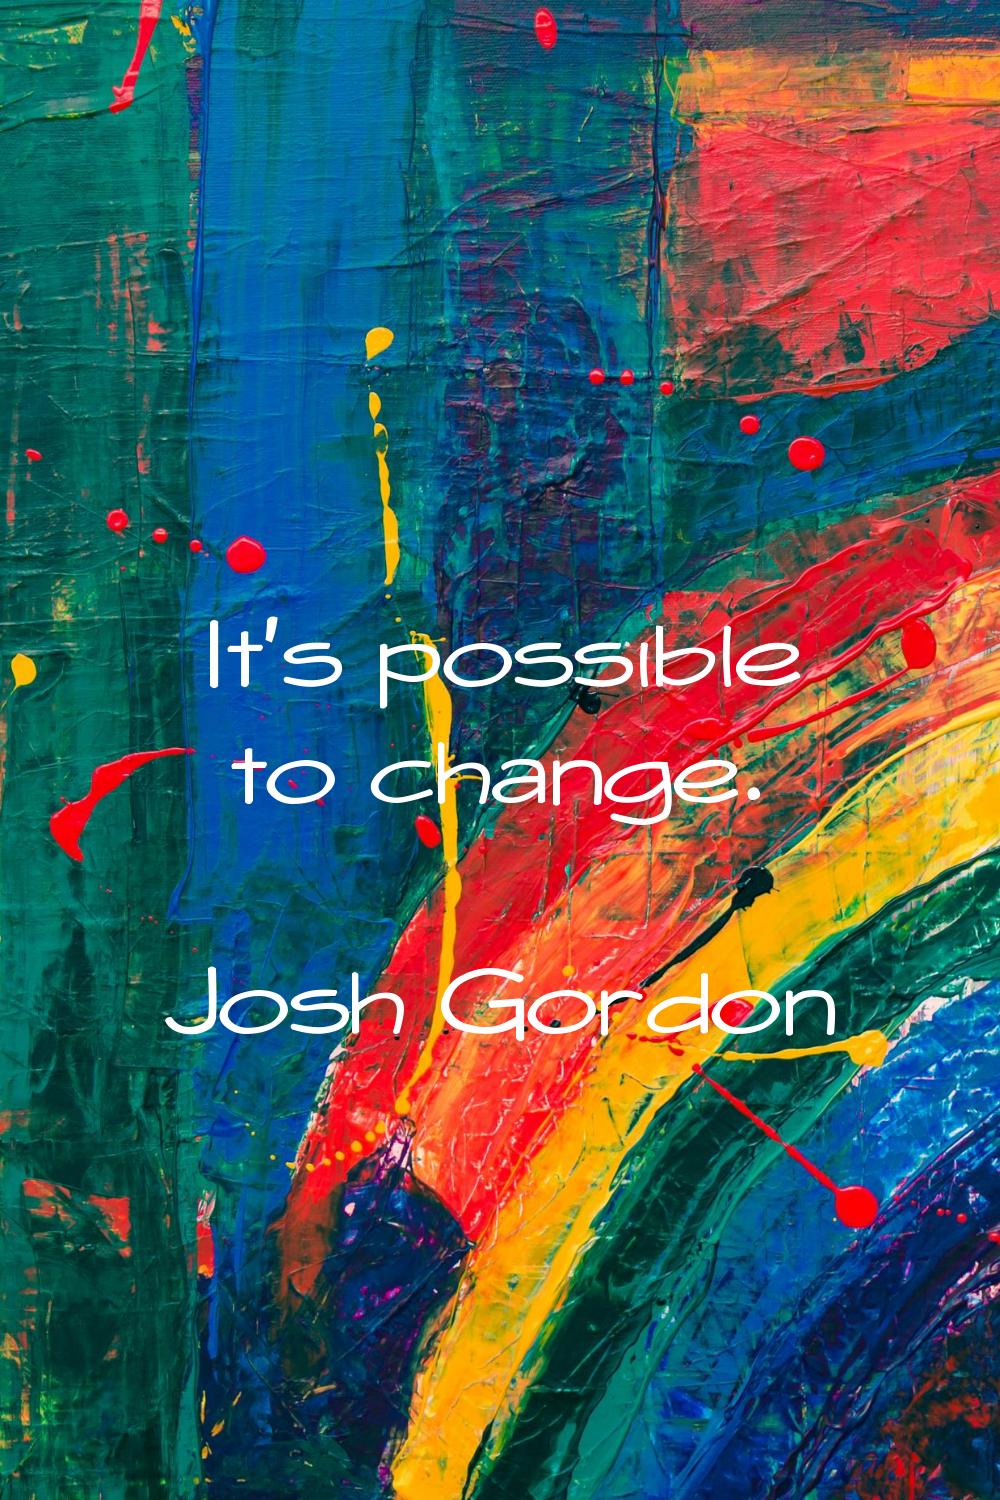 It's possible to change.